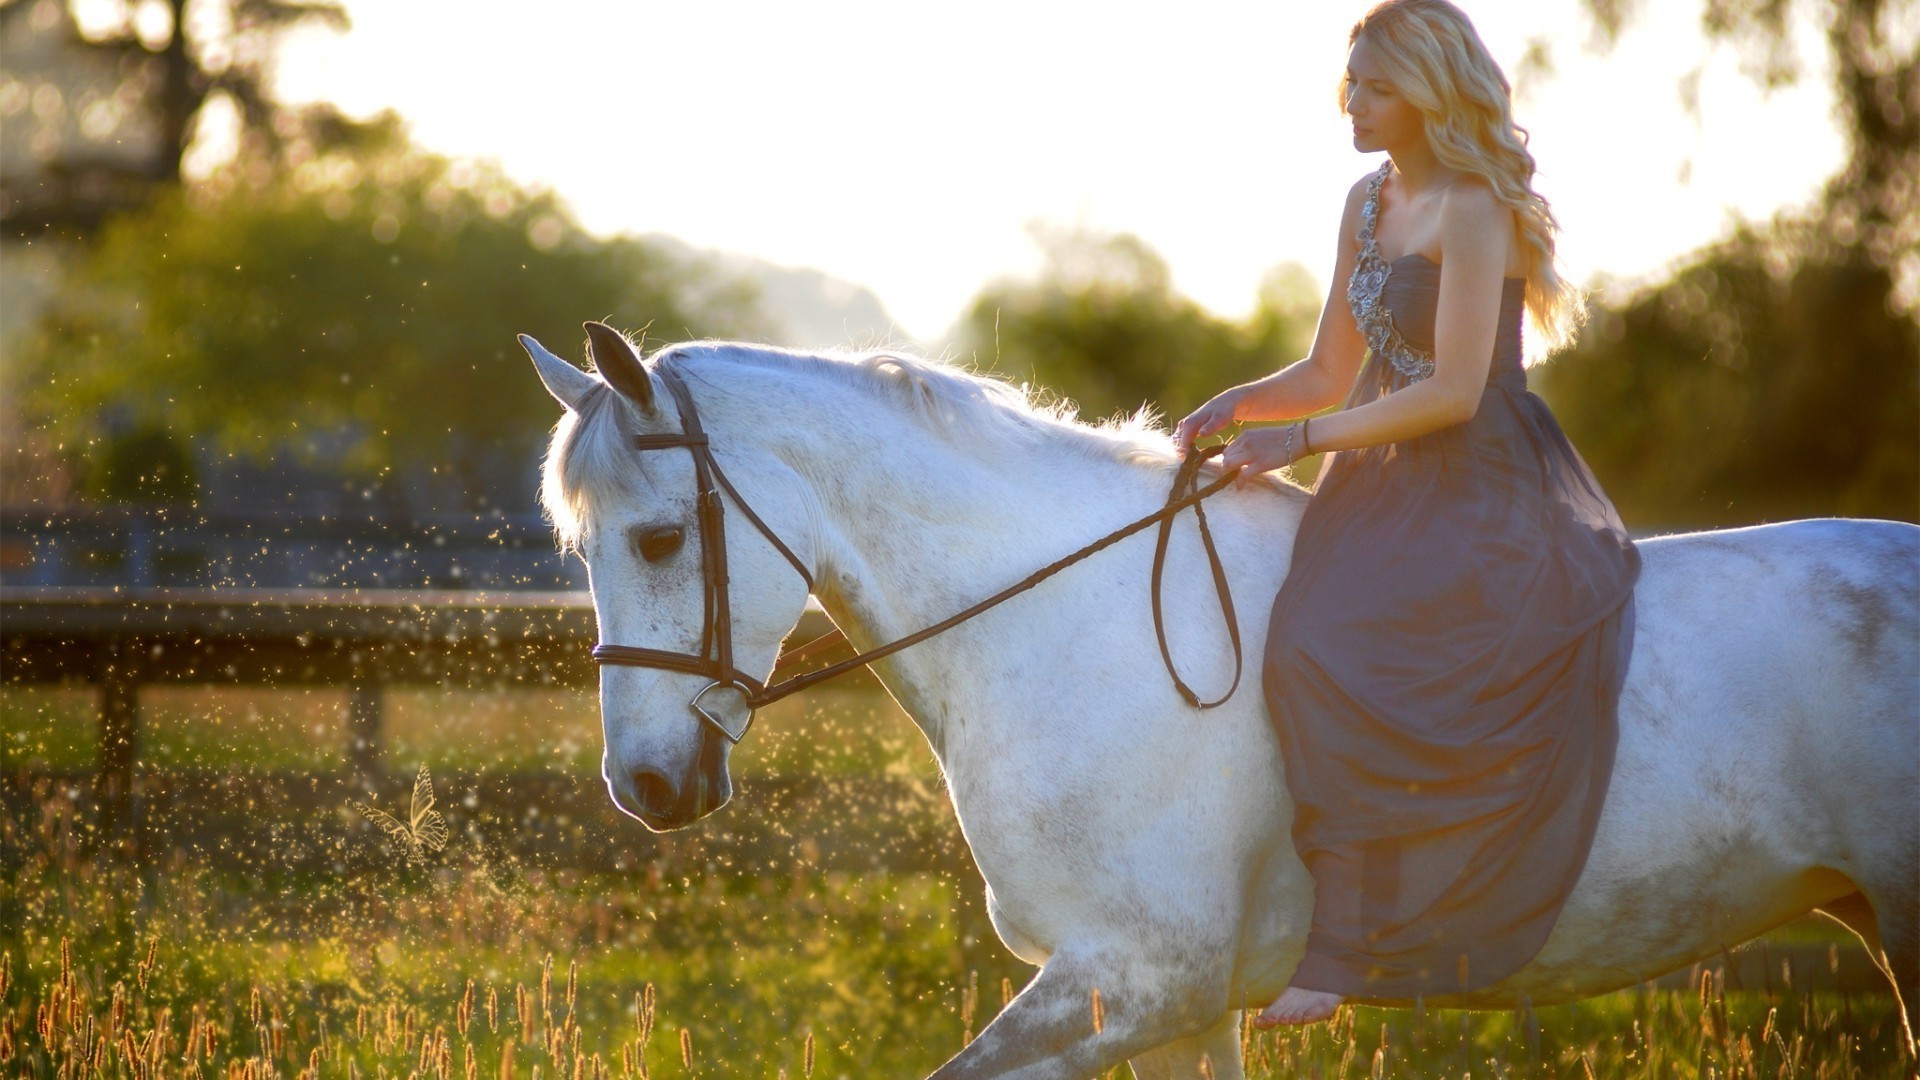 with animals one outdoors nature grass happiness horse cavalry mammal beautiful leisure summer hayfield motion lifestyle enjoyment woman love sitting girl blur